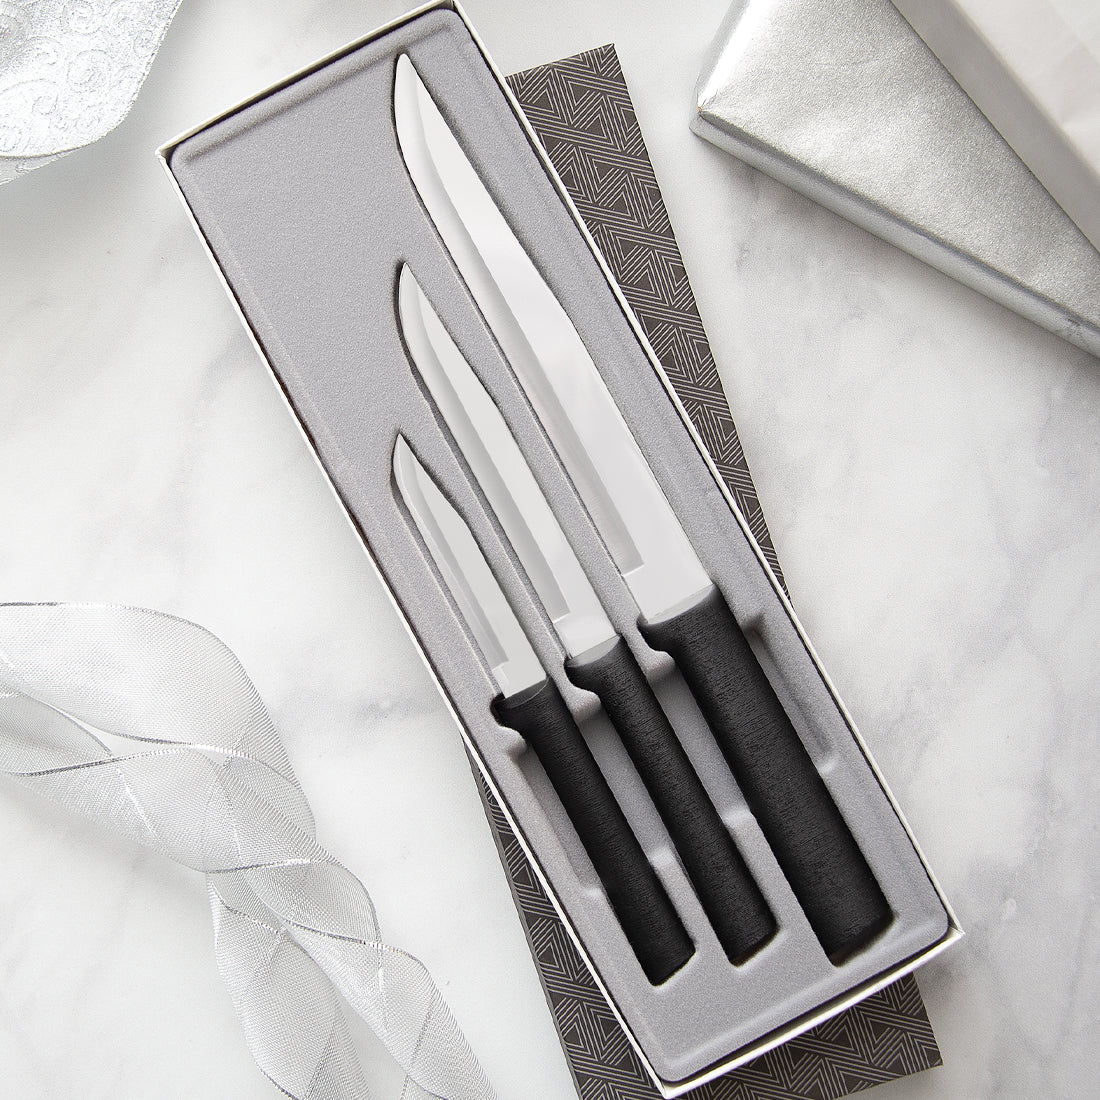 Rada Cutlery Housewarming Gift Set with silver handles in black-lined gift box